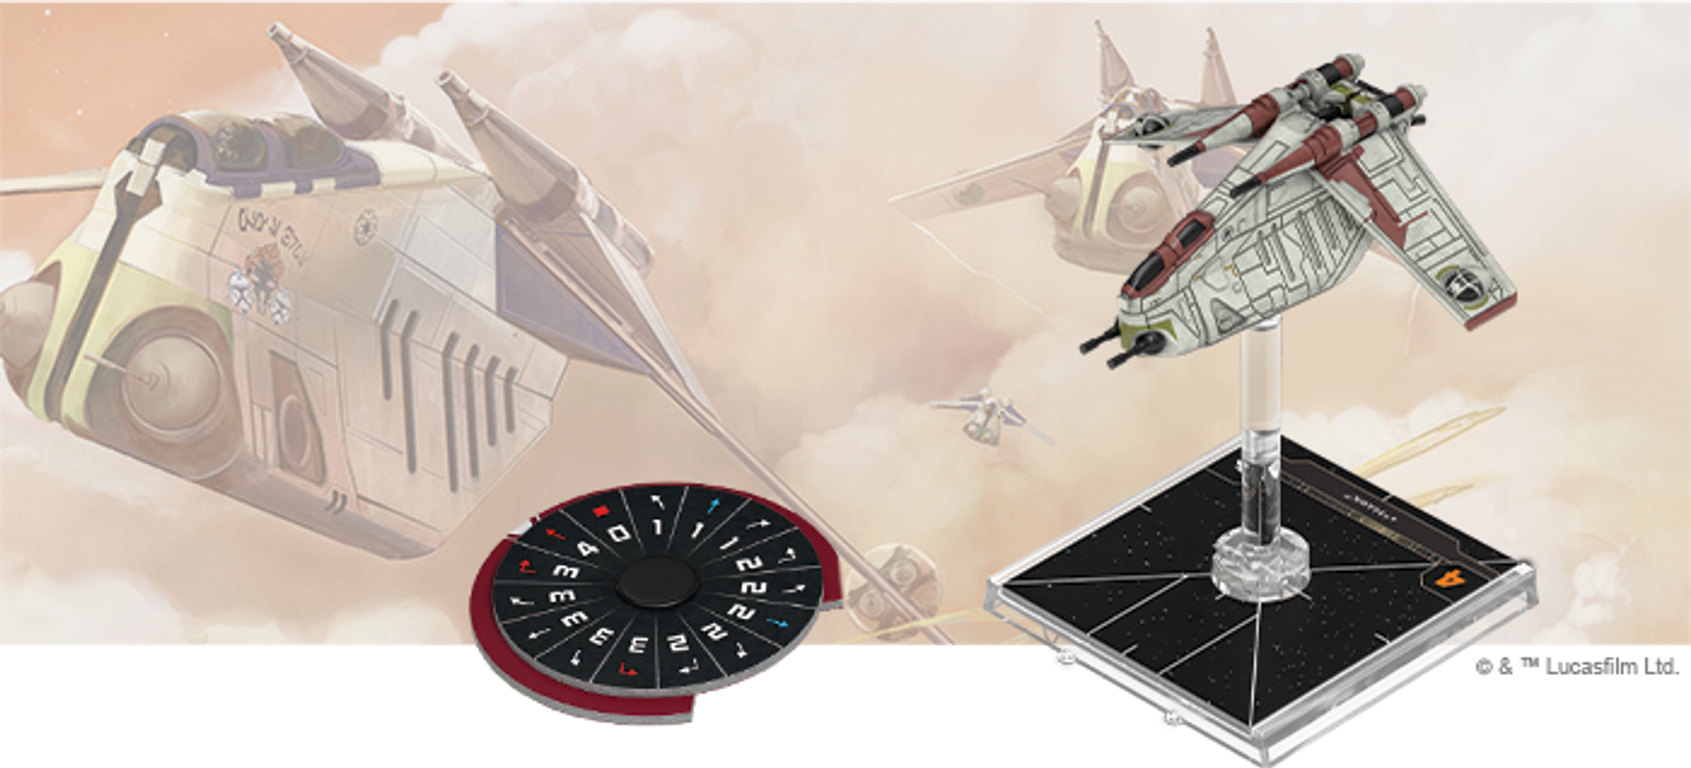 Star Wars: X-Wing (Second Edition) – LAAT/i Gunship Expansion Pack miniatuur